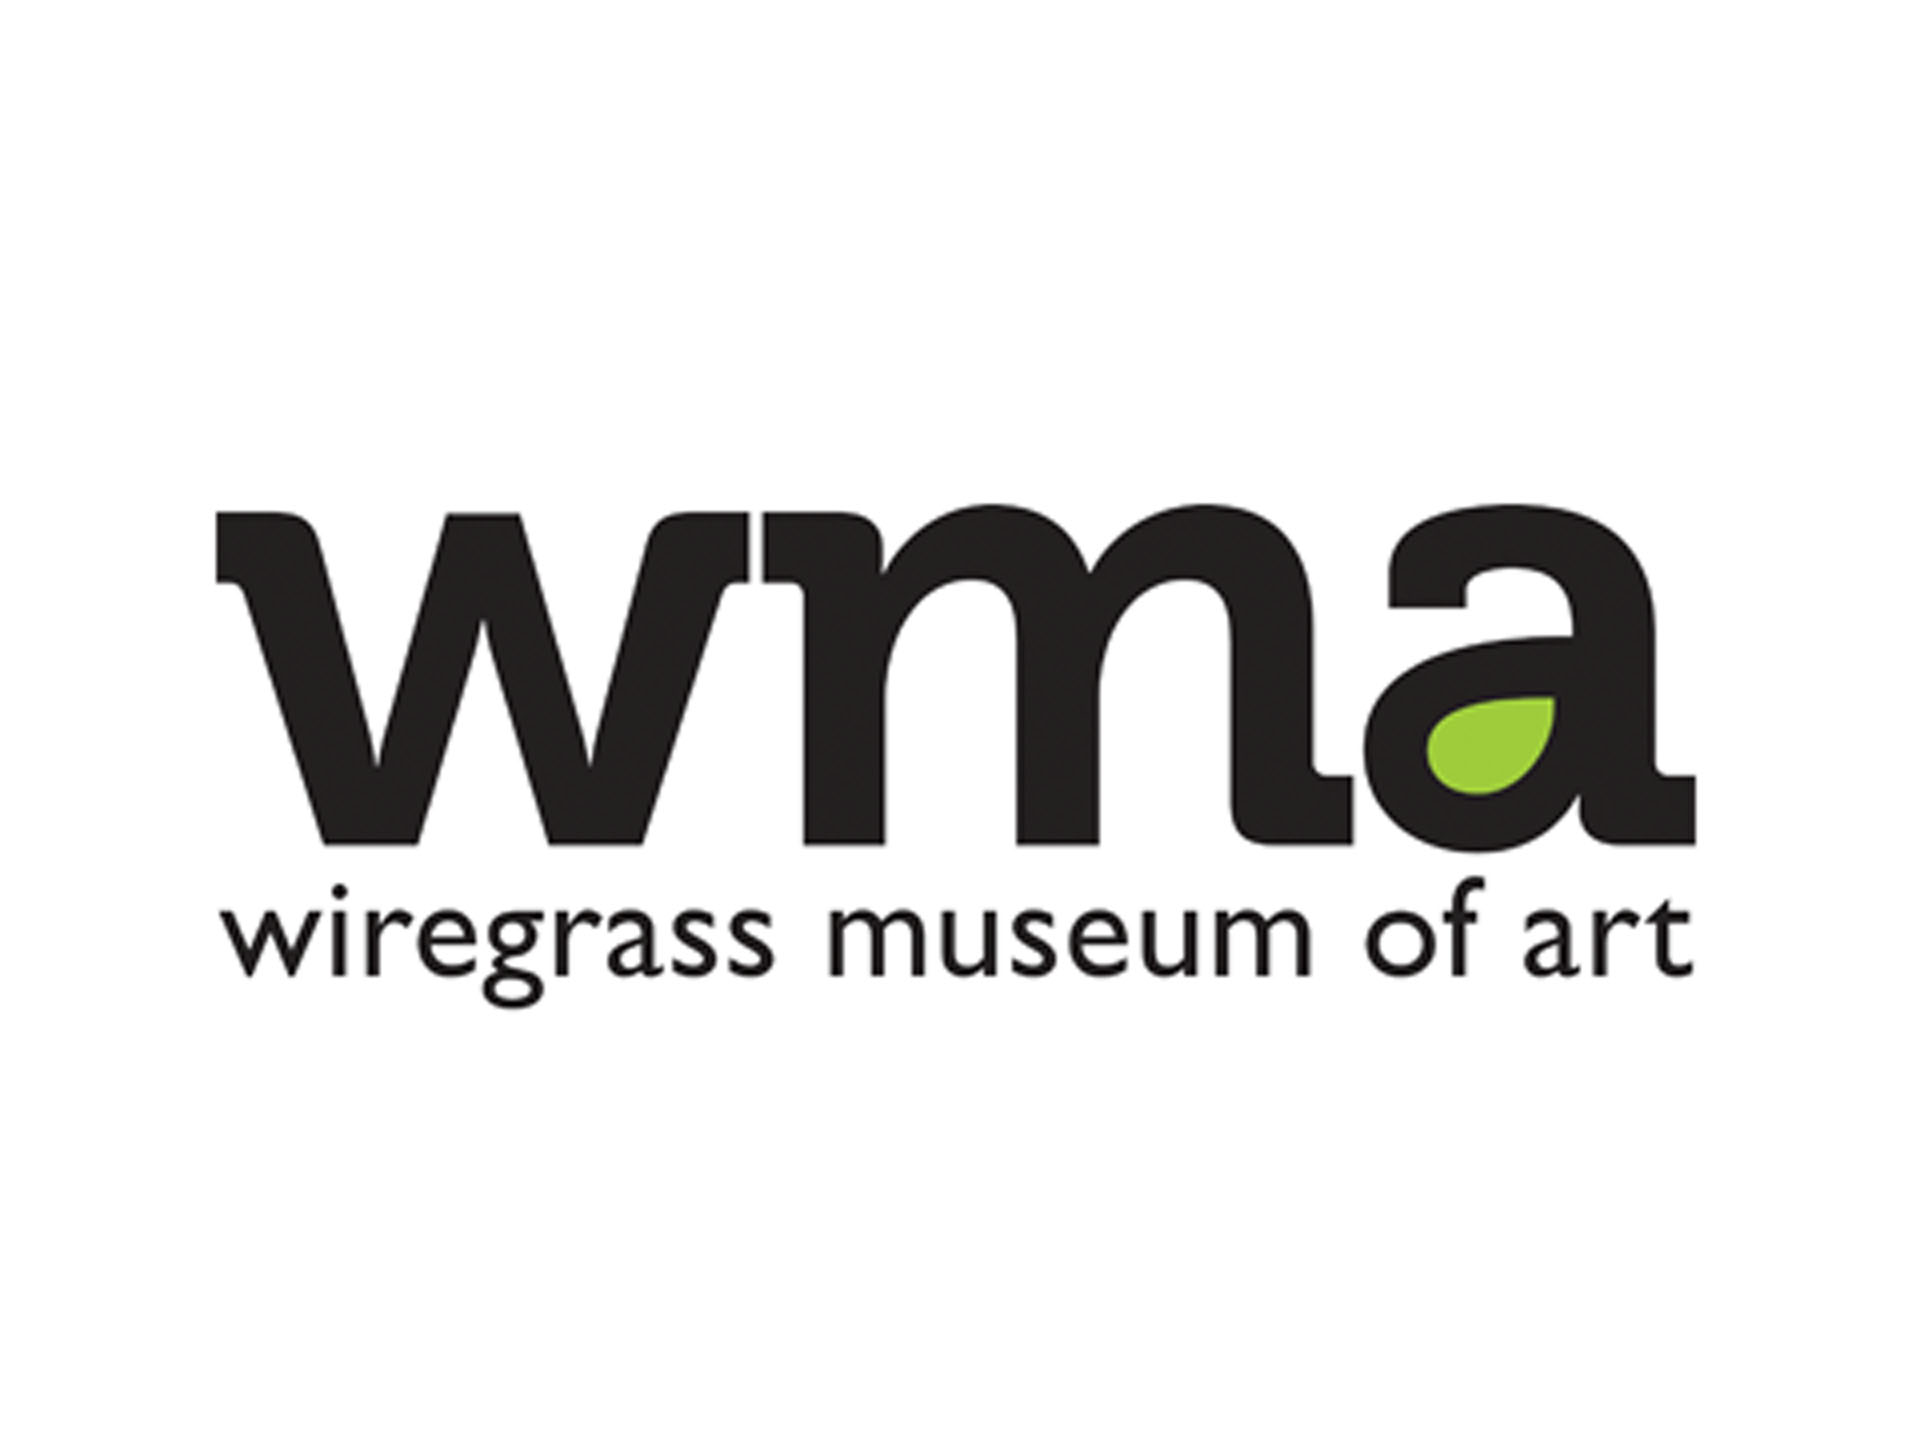 WMA awarded more than $15,000 for arts education programs